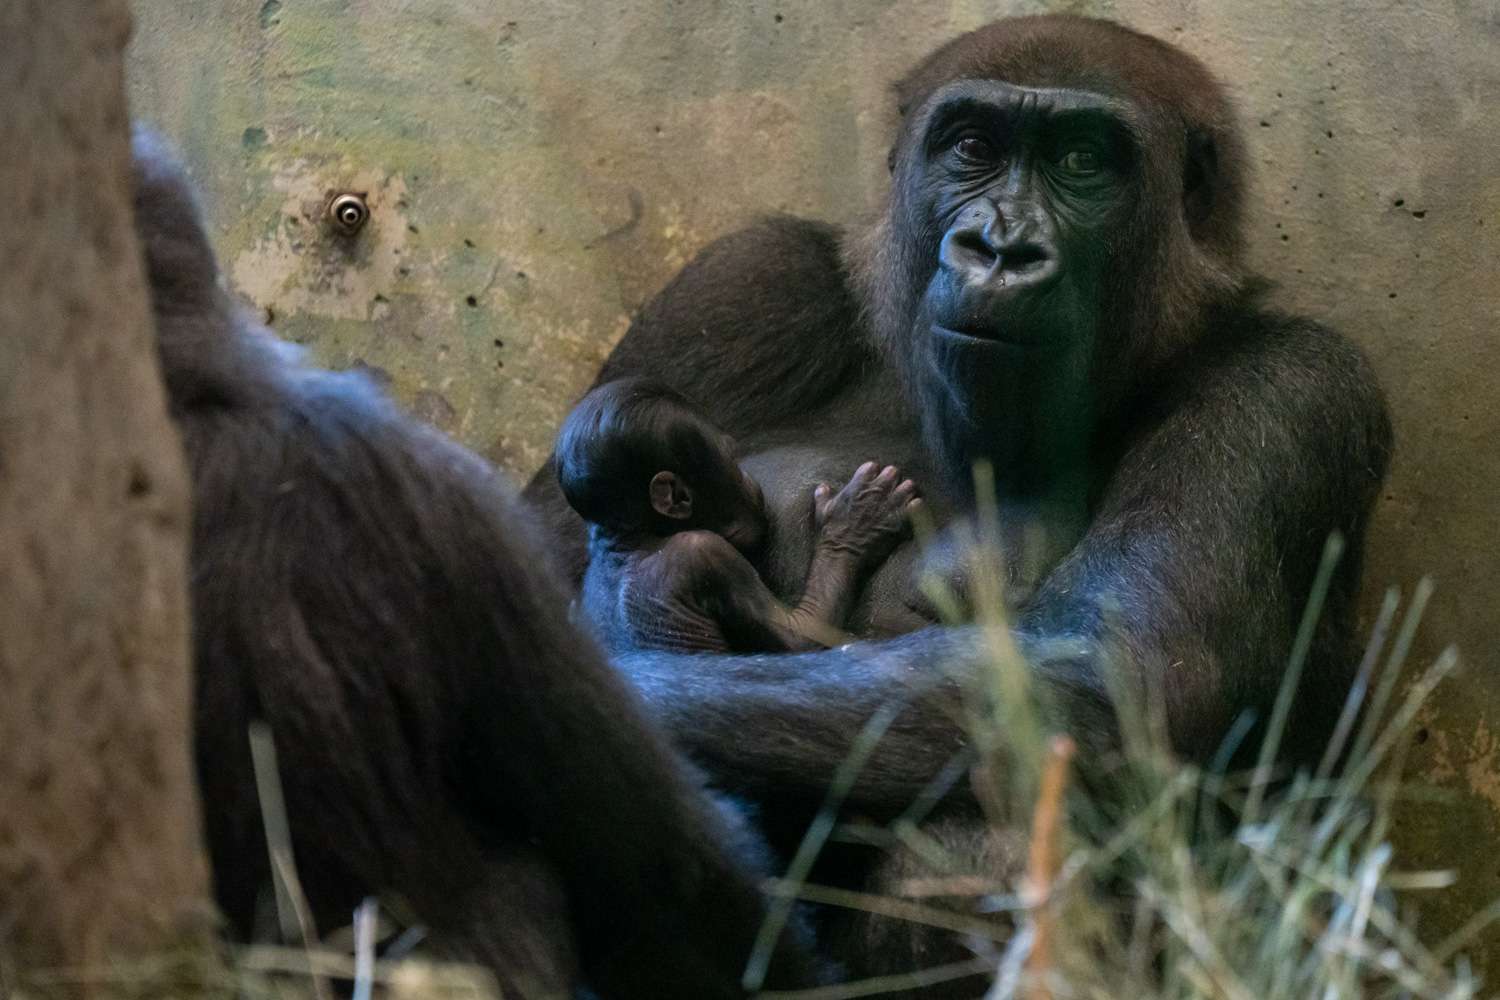 Gorilla thought to be male surprises zoo with birth